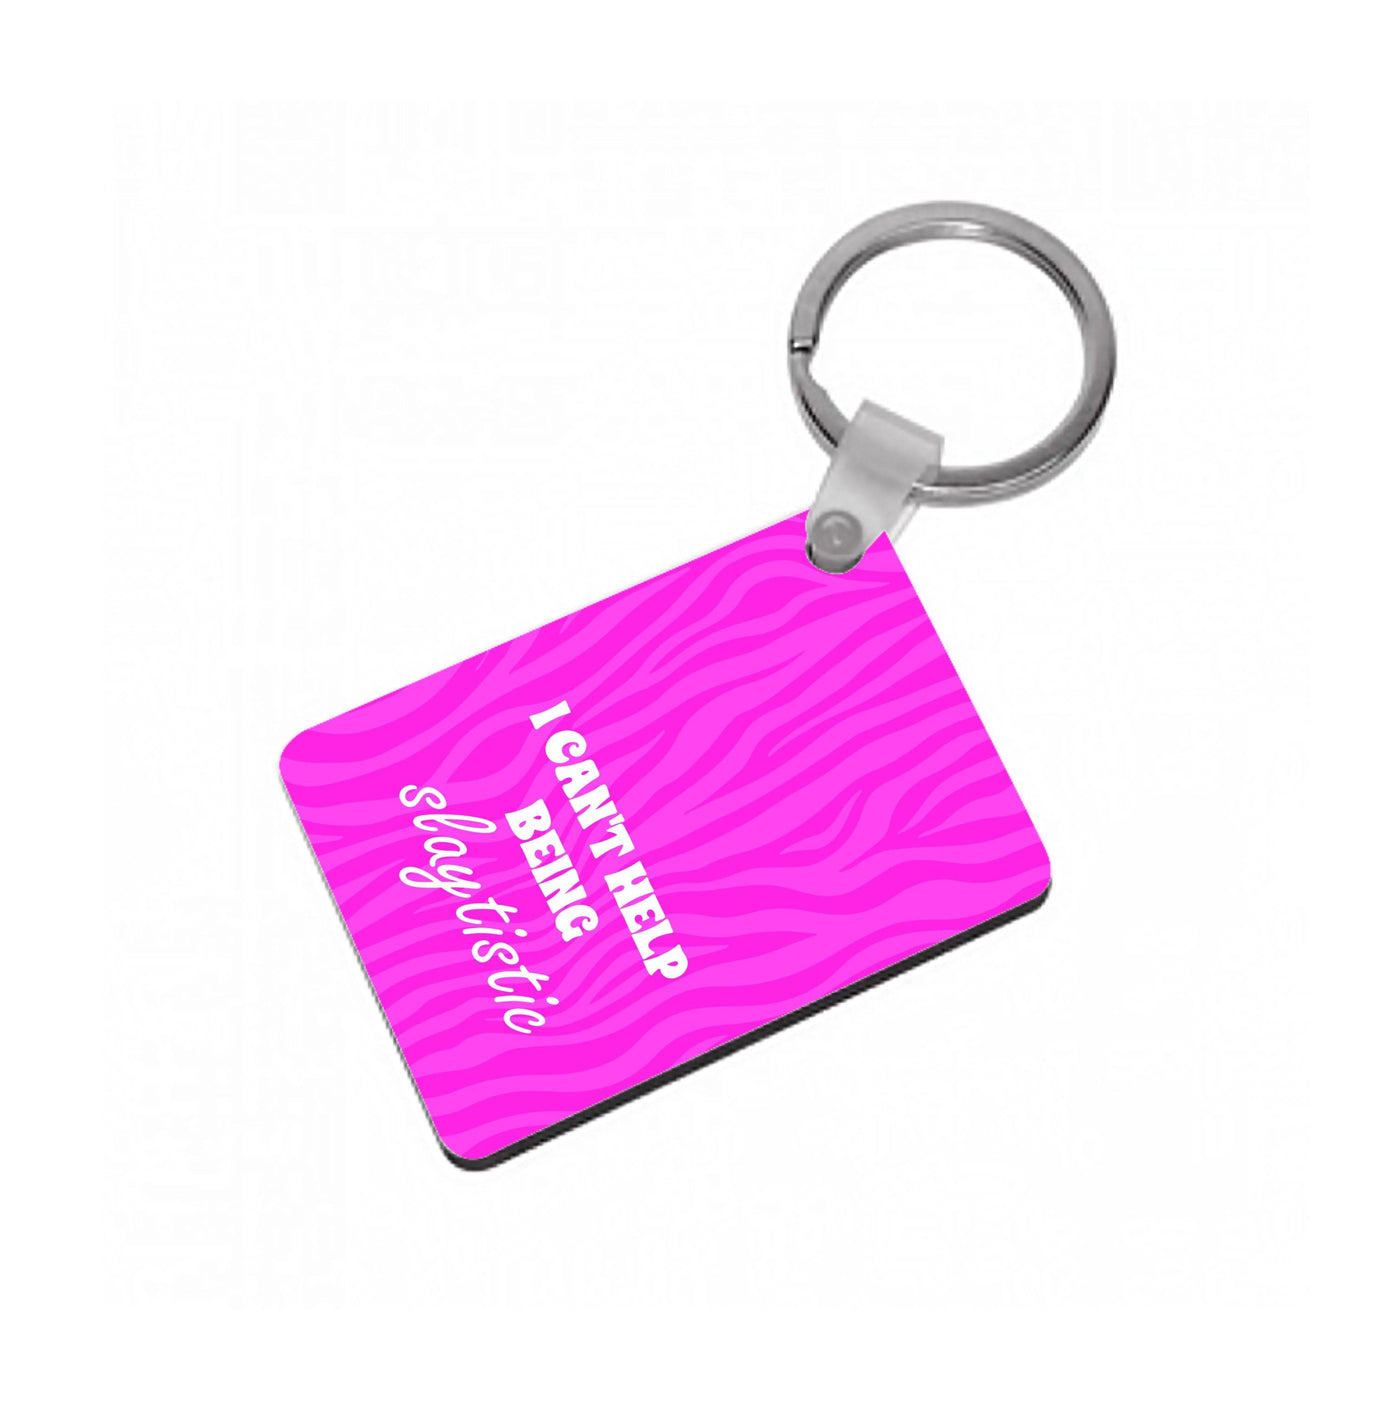 I Can't Help Being Slaytistic - TikTok Trends Keyring